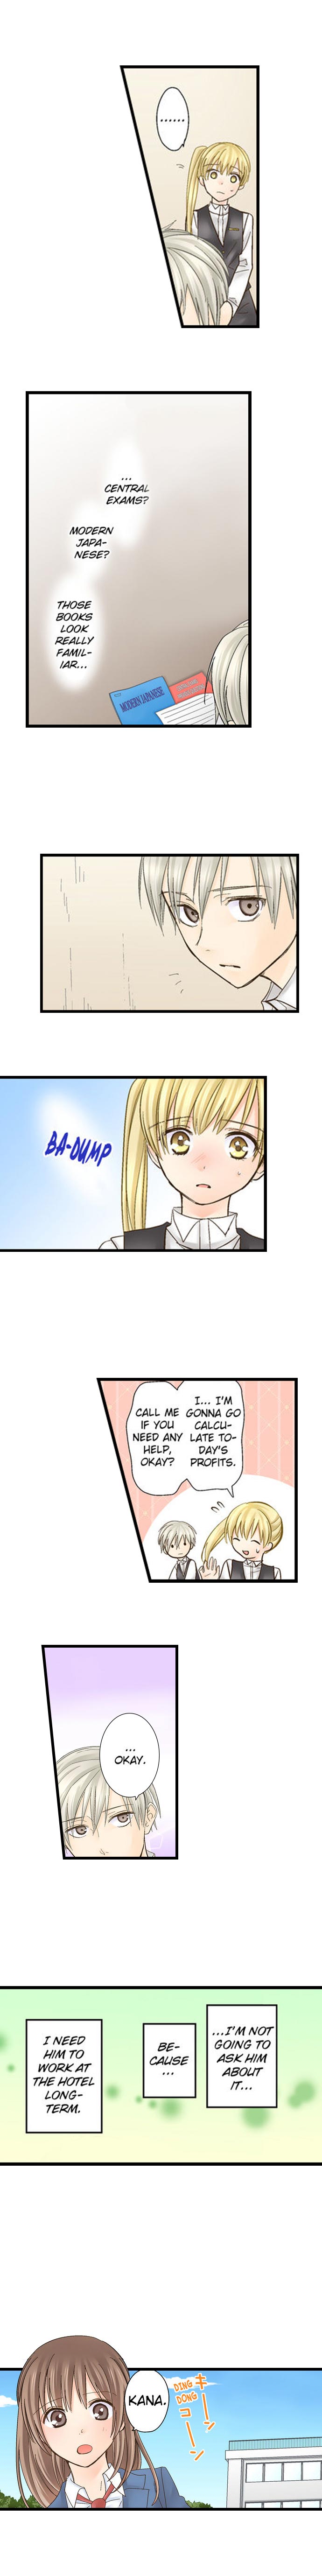 Running a Love Hotel with My Math Teacher - Chapter 23 Page 2